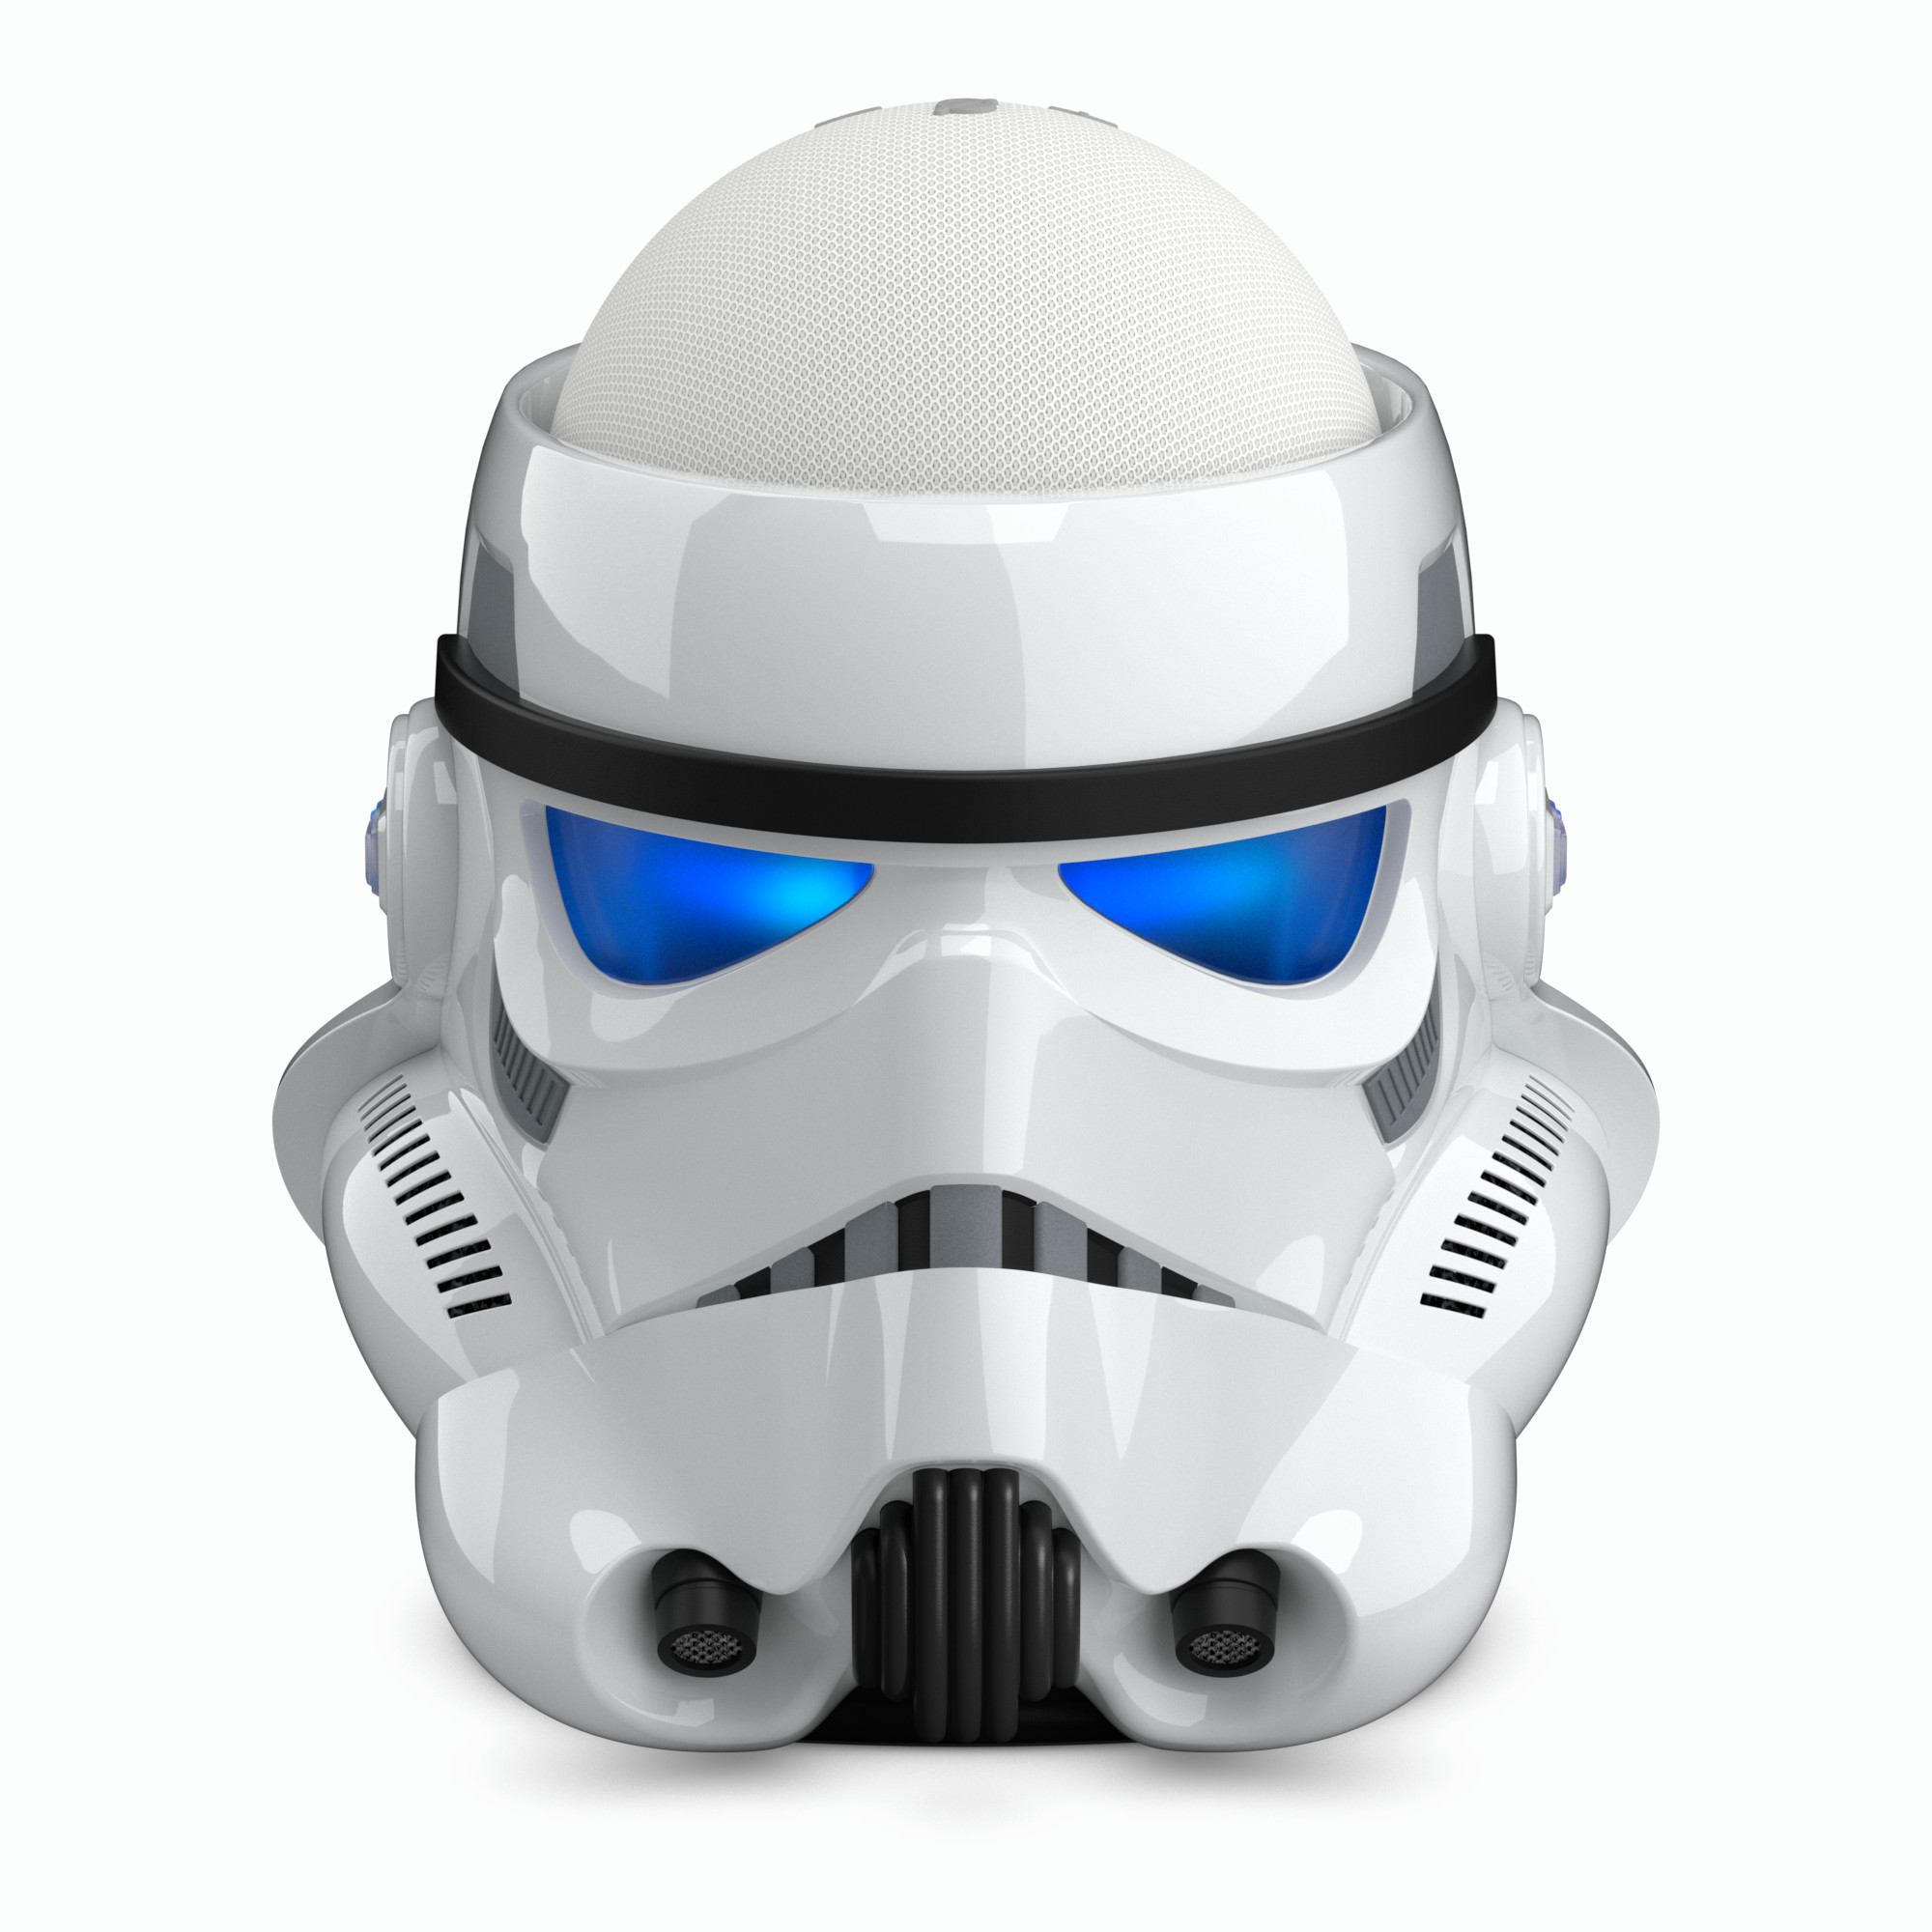 Product render of Stormtrooper Helmet with Echo Dot. Lighting, compositing, and material creation were made in Cinema4D